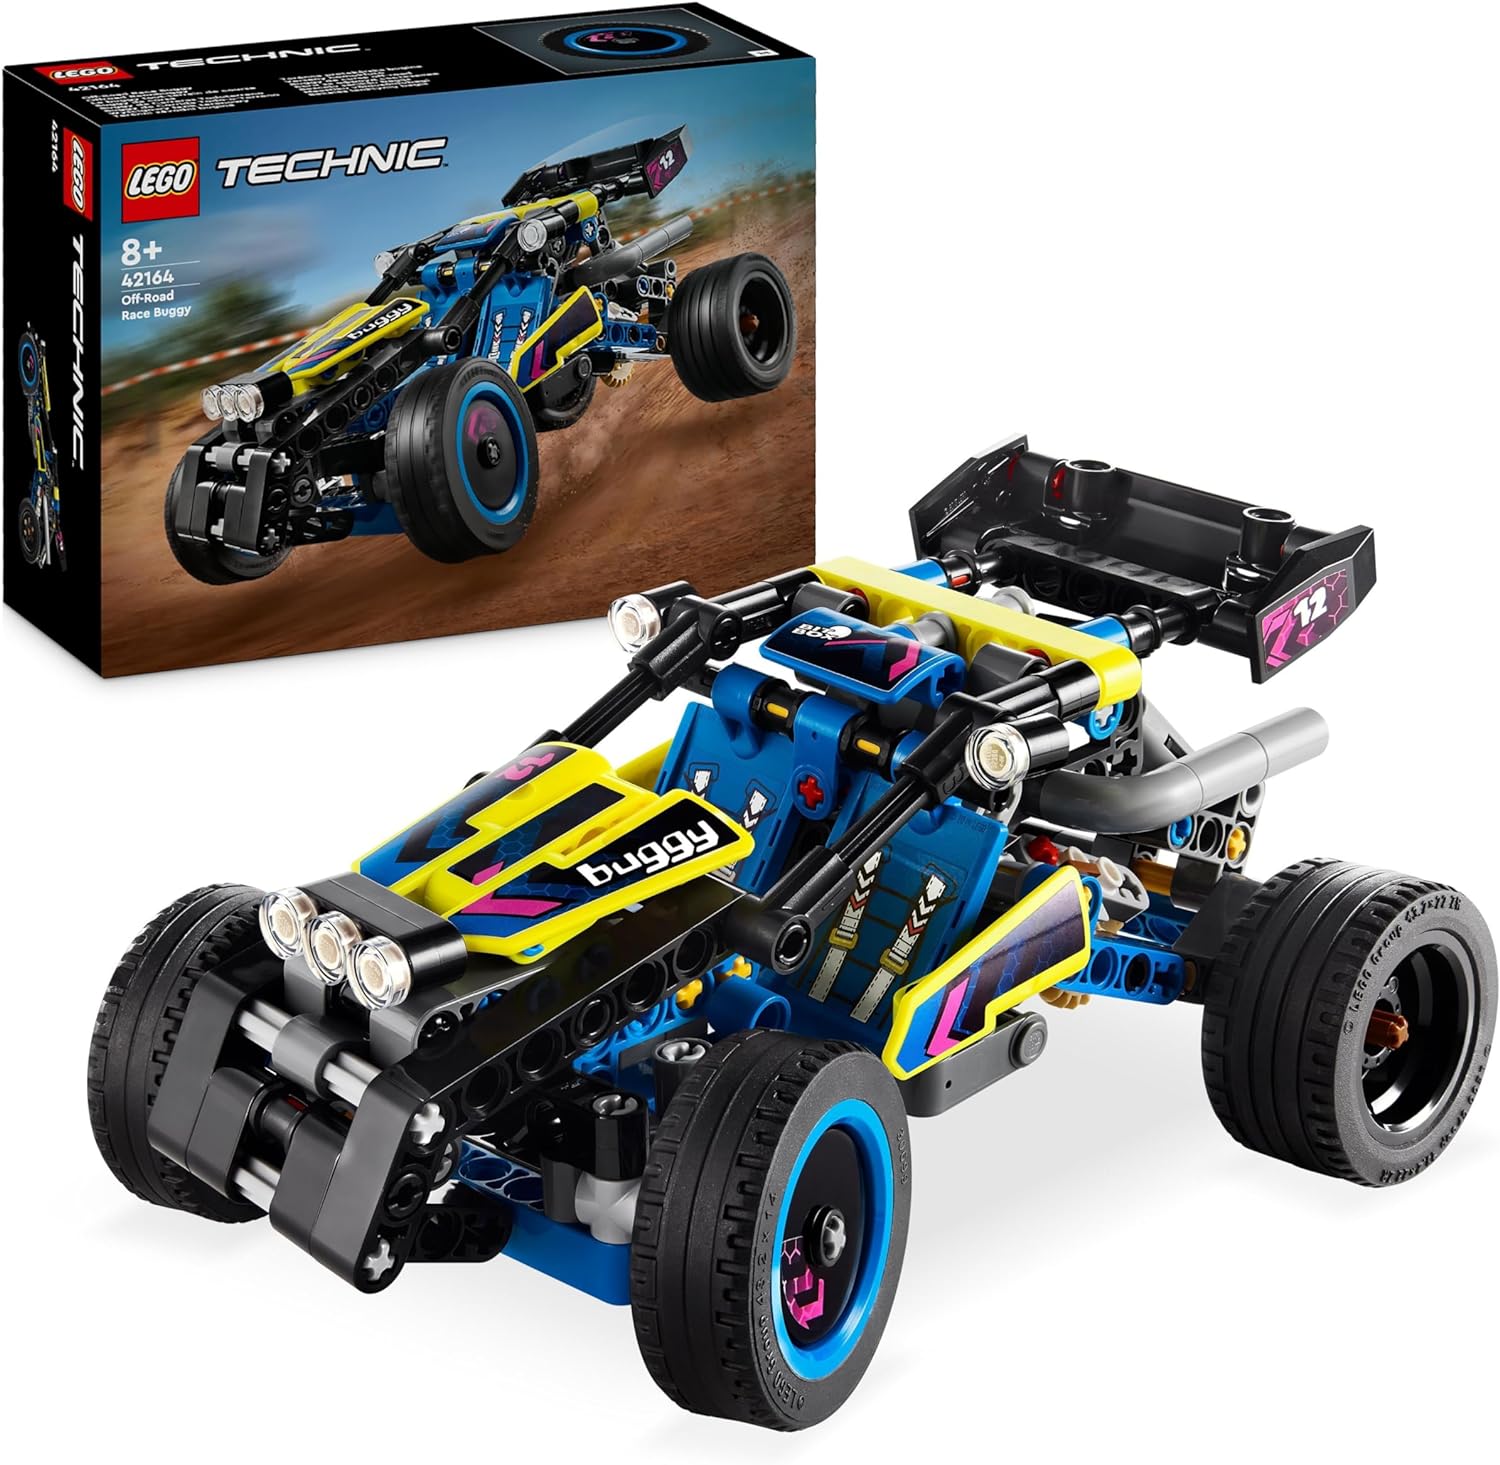 LEGO Technic Offroad Racing Buggy, Car Toy for Kids, Buggy Racing Car Building Kit, Gift for 8 Year Old Boys and Girls, Rally Car Model 42164